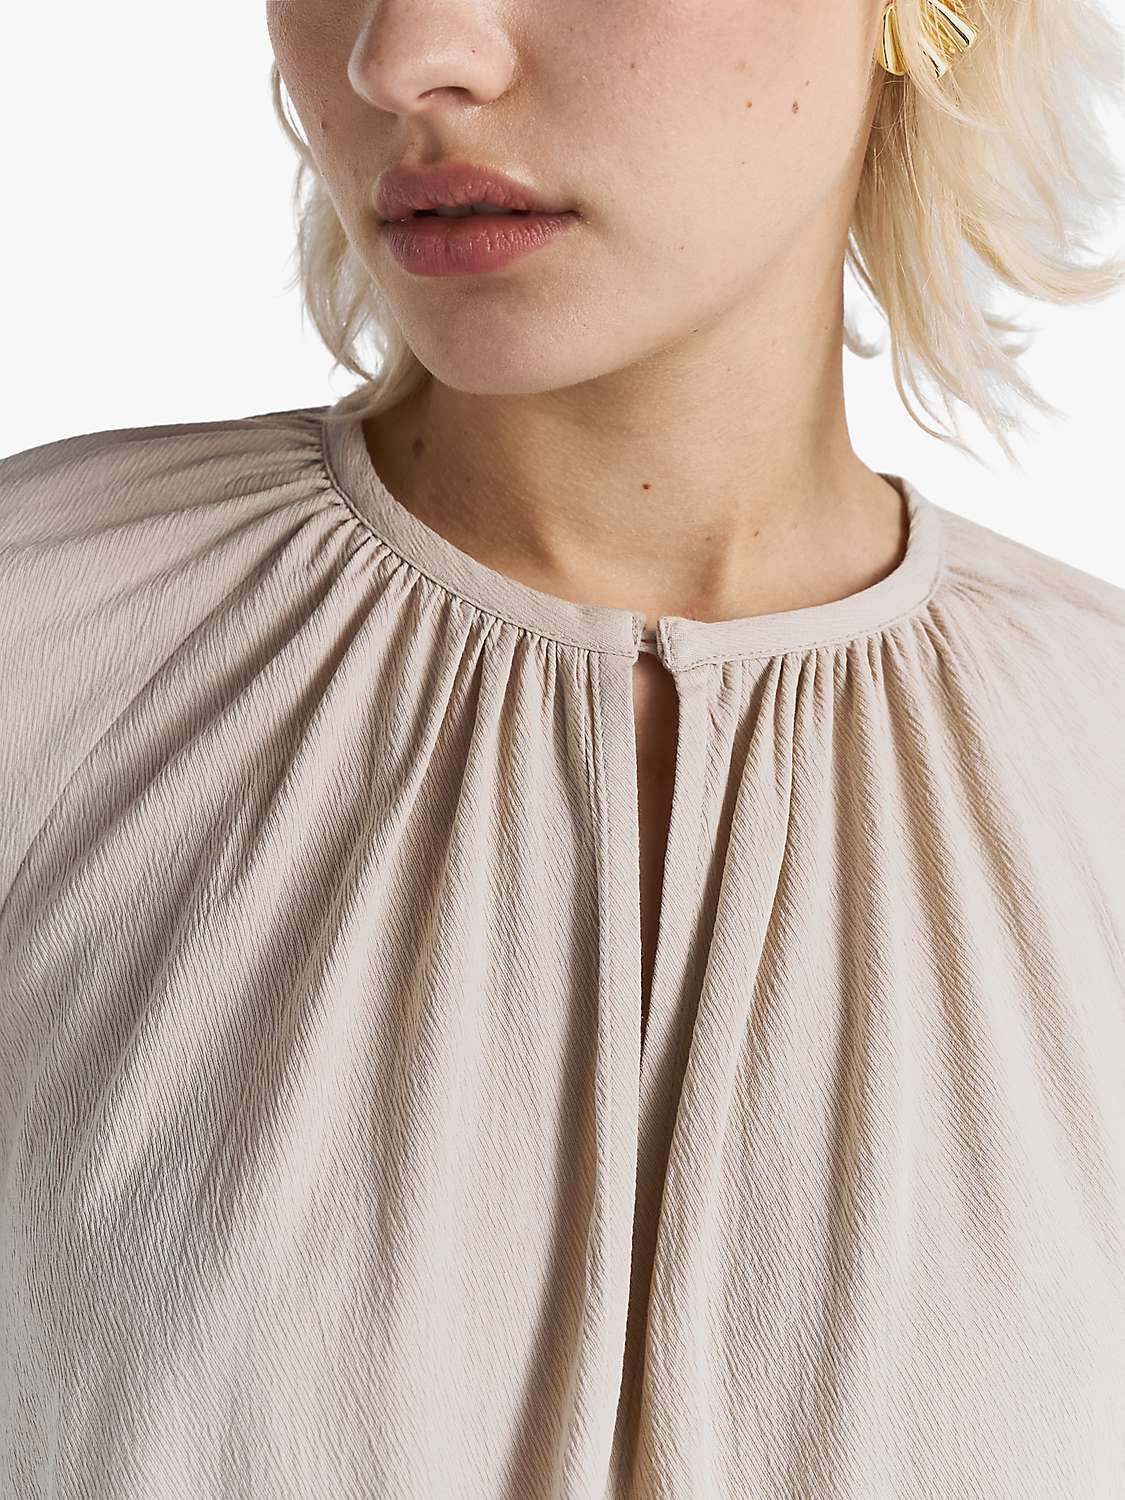 Buy Twist & Tango Sarai Relaxed Draped Blouse, Greige Online at johnlewis.com